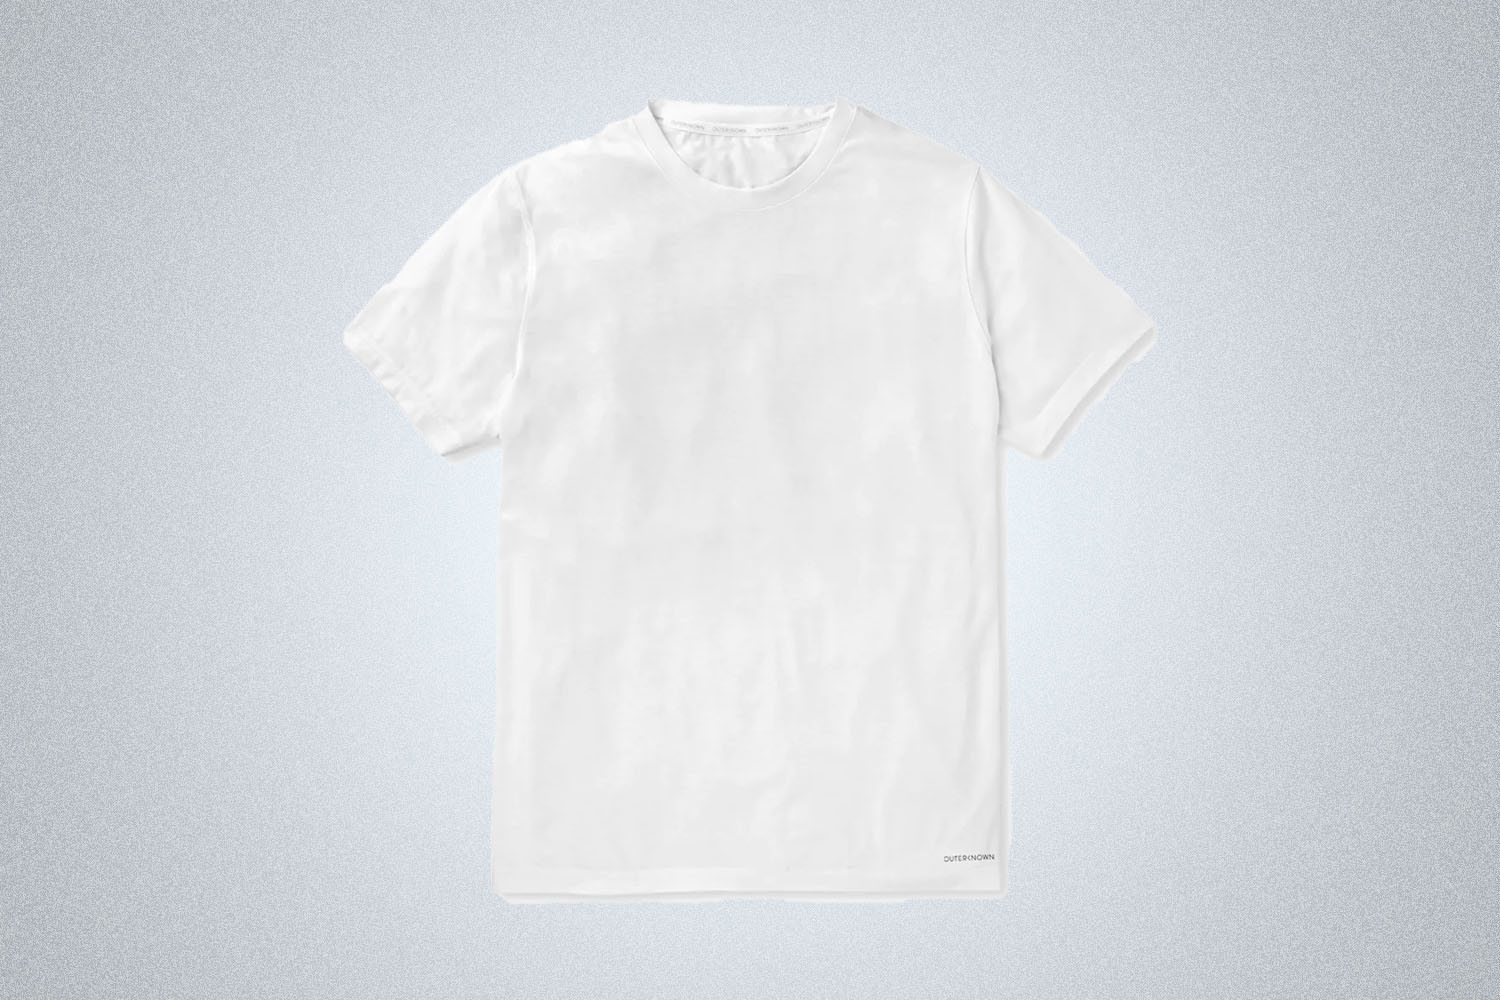 a white tee from Outerknown on a grey background